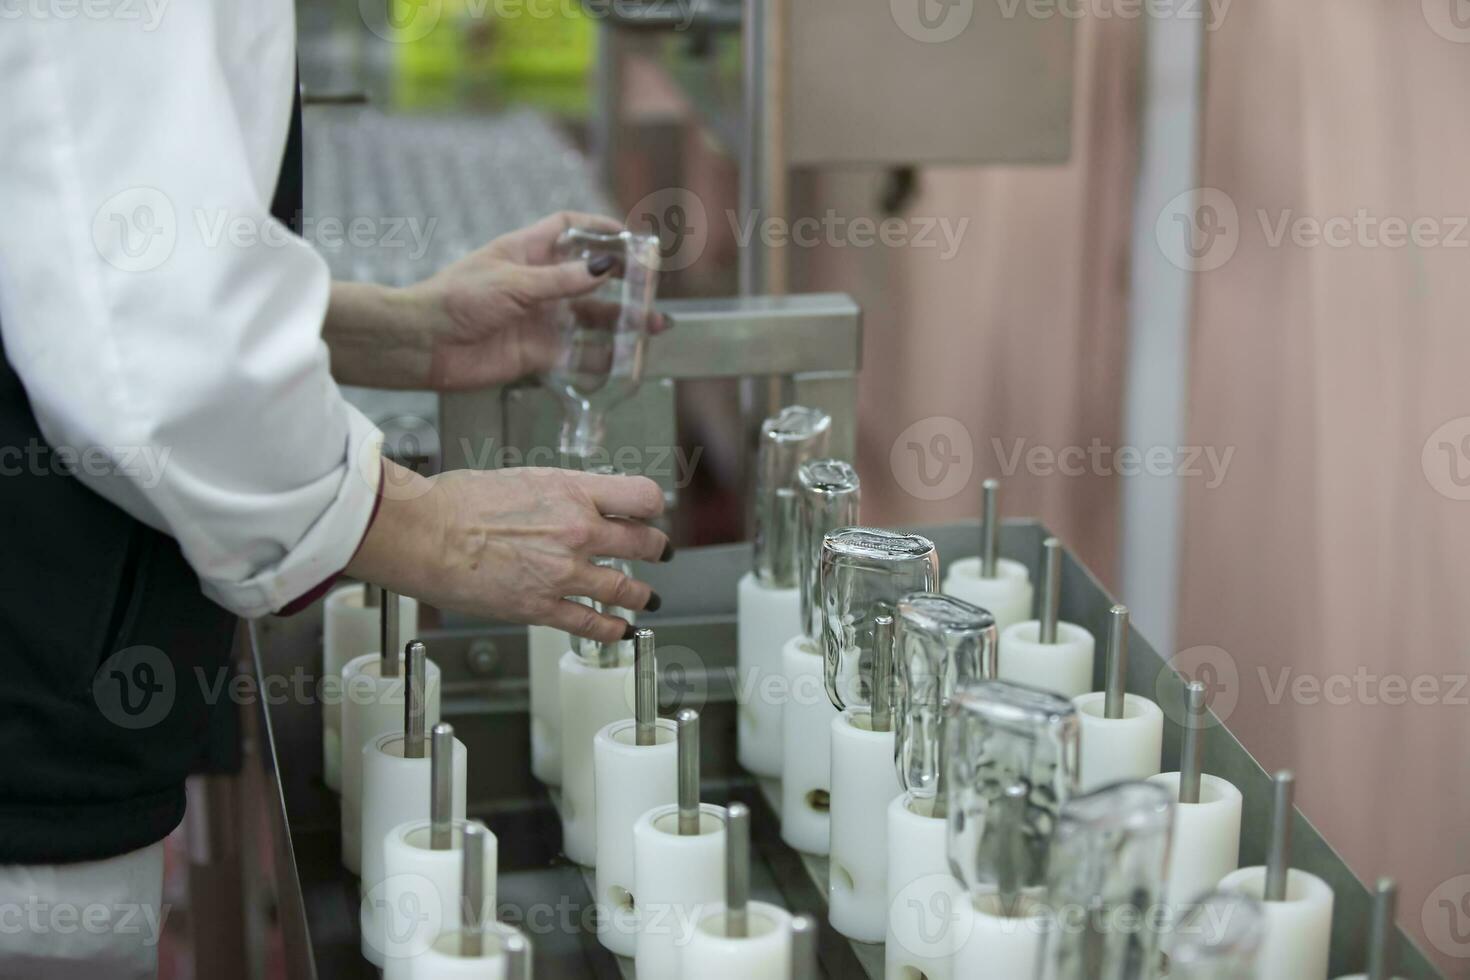 A row of glass bottles on a conveyor belt for the production of alcoholic beverages. photo